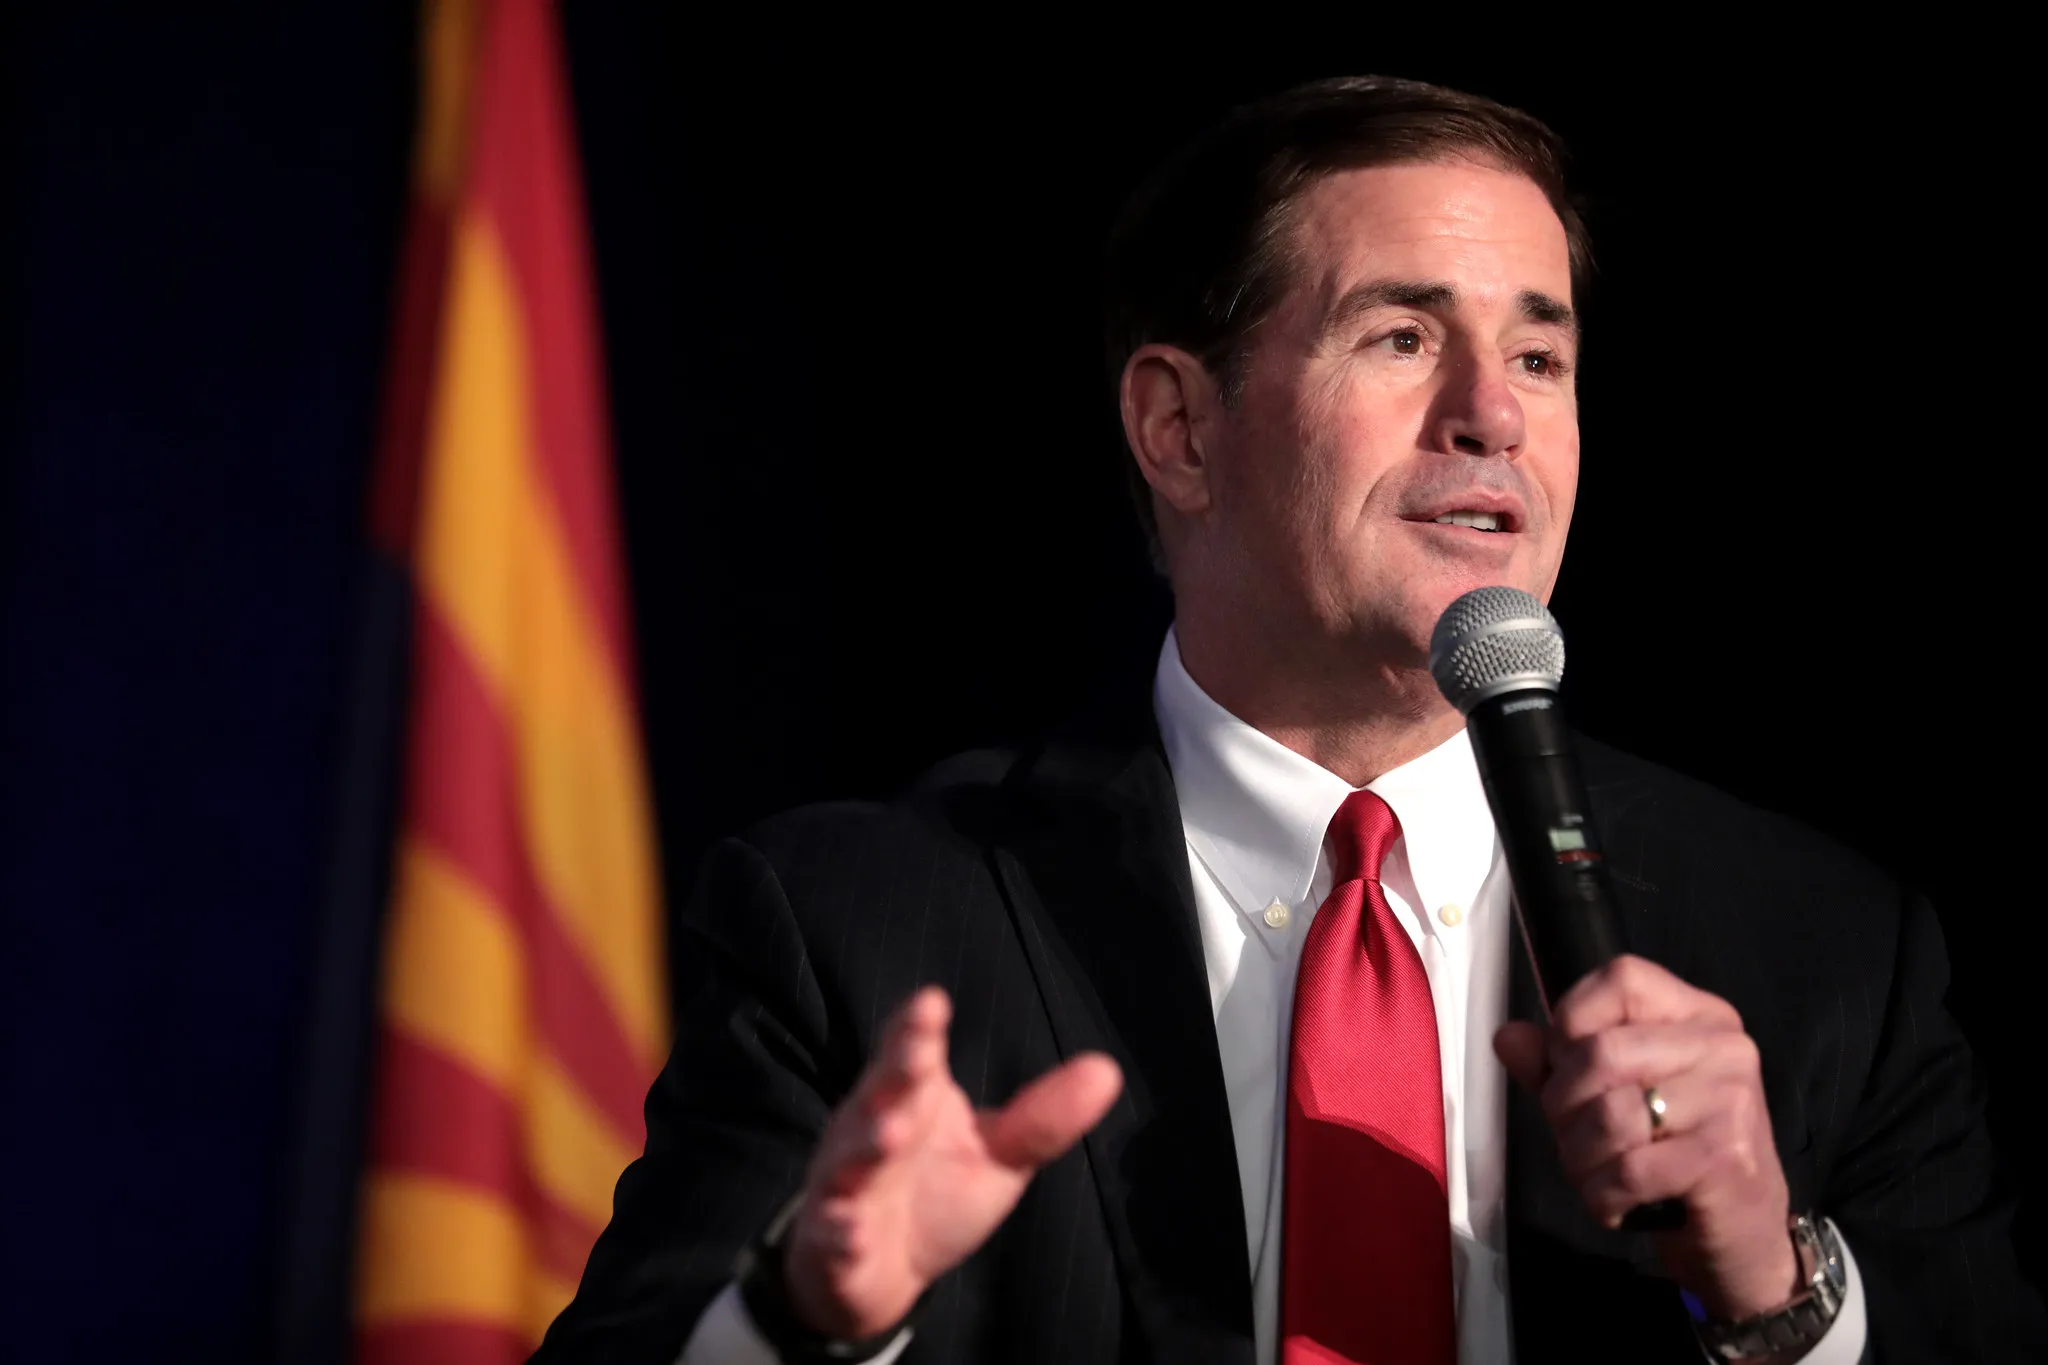 Arizona Gov. Doug Ducey, who has signed a law barring abortions based on non-fatal genetic disorders, speaks at an awards luncheon in Scottsdale, Ariz., June 17, 2019. Credit: Gage Skidmore via Flickr (CC BY-SA 2.0)?w=200&h=150